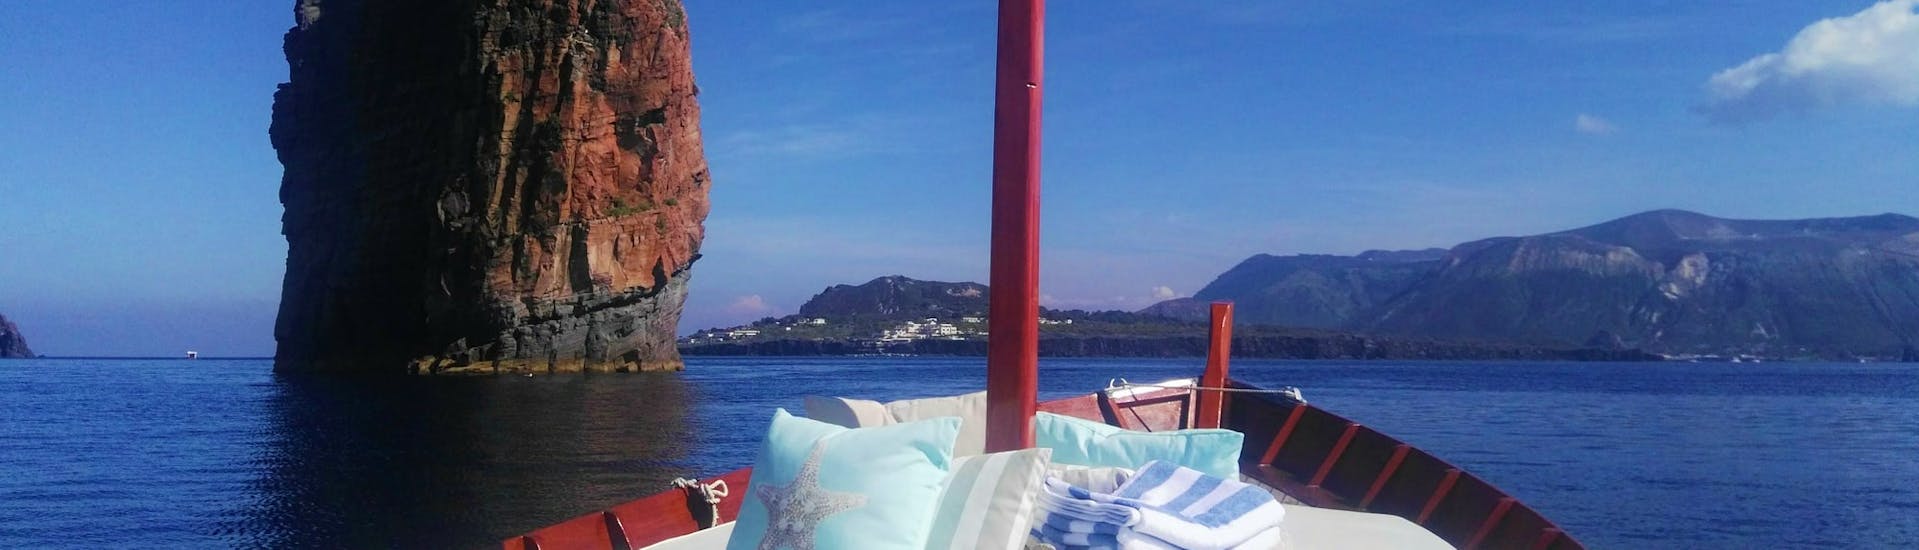 View of the Aeolian Islands during a private boat trip around Lipari South & Vulcano with Eoliana.